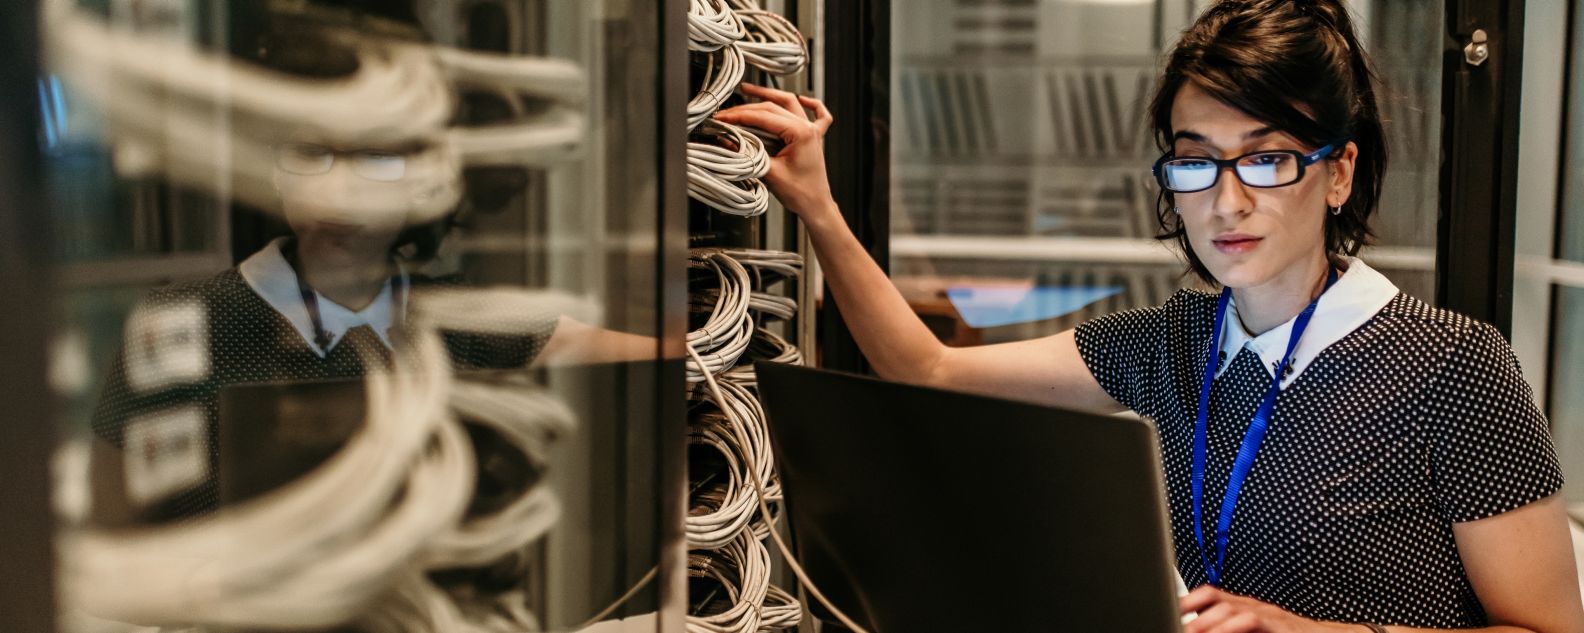 Person standing in server room